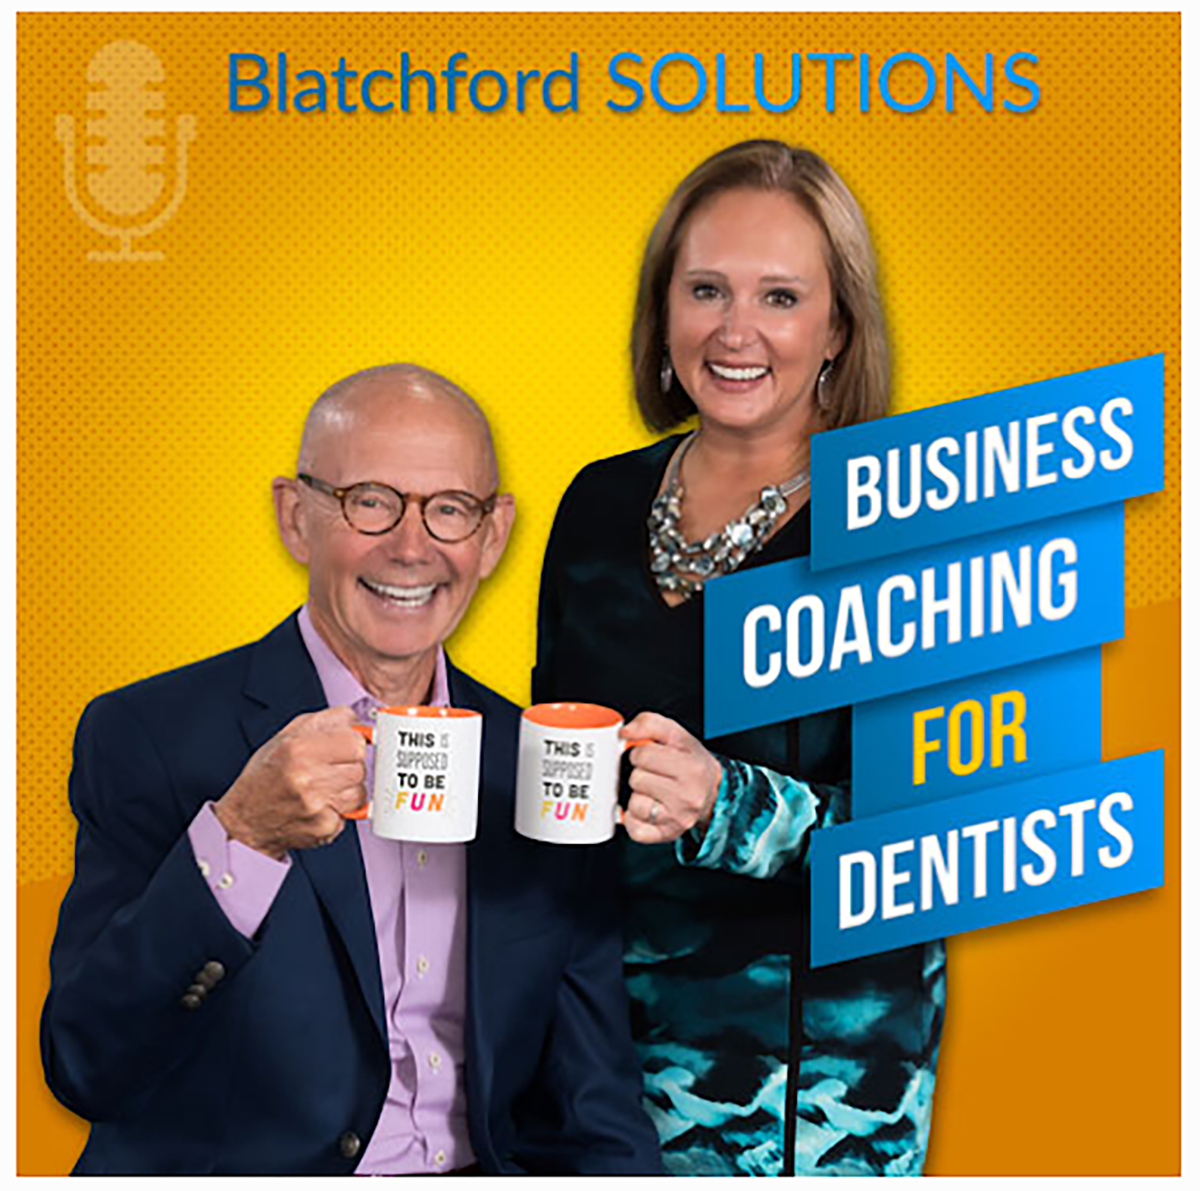 Blatchford Solutions: Business Coaching For Dentists logo